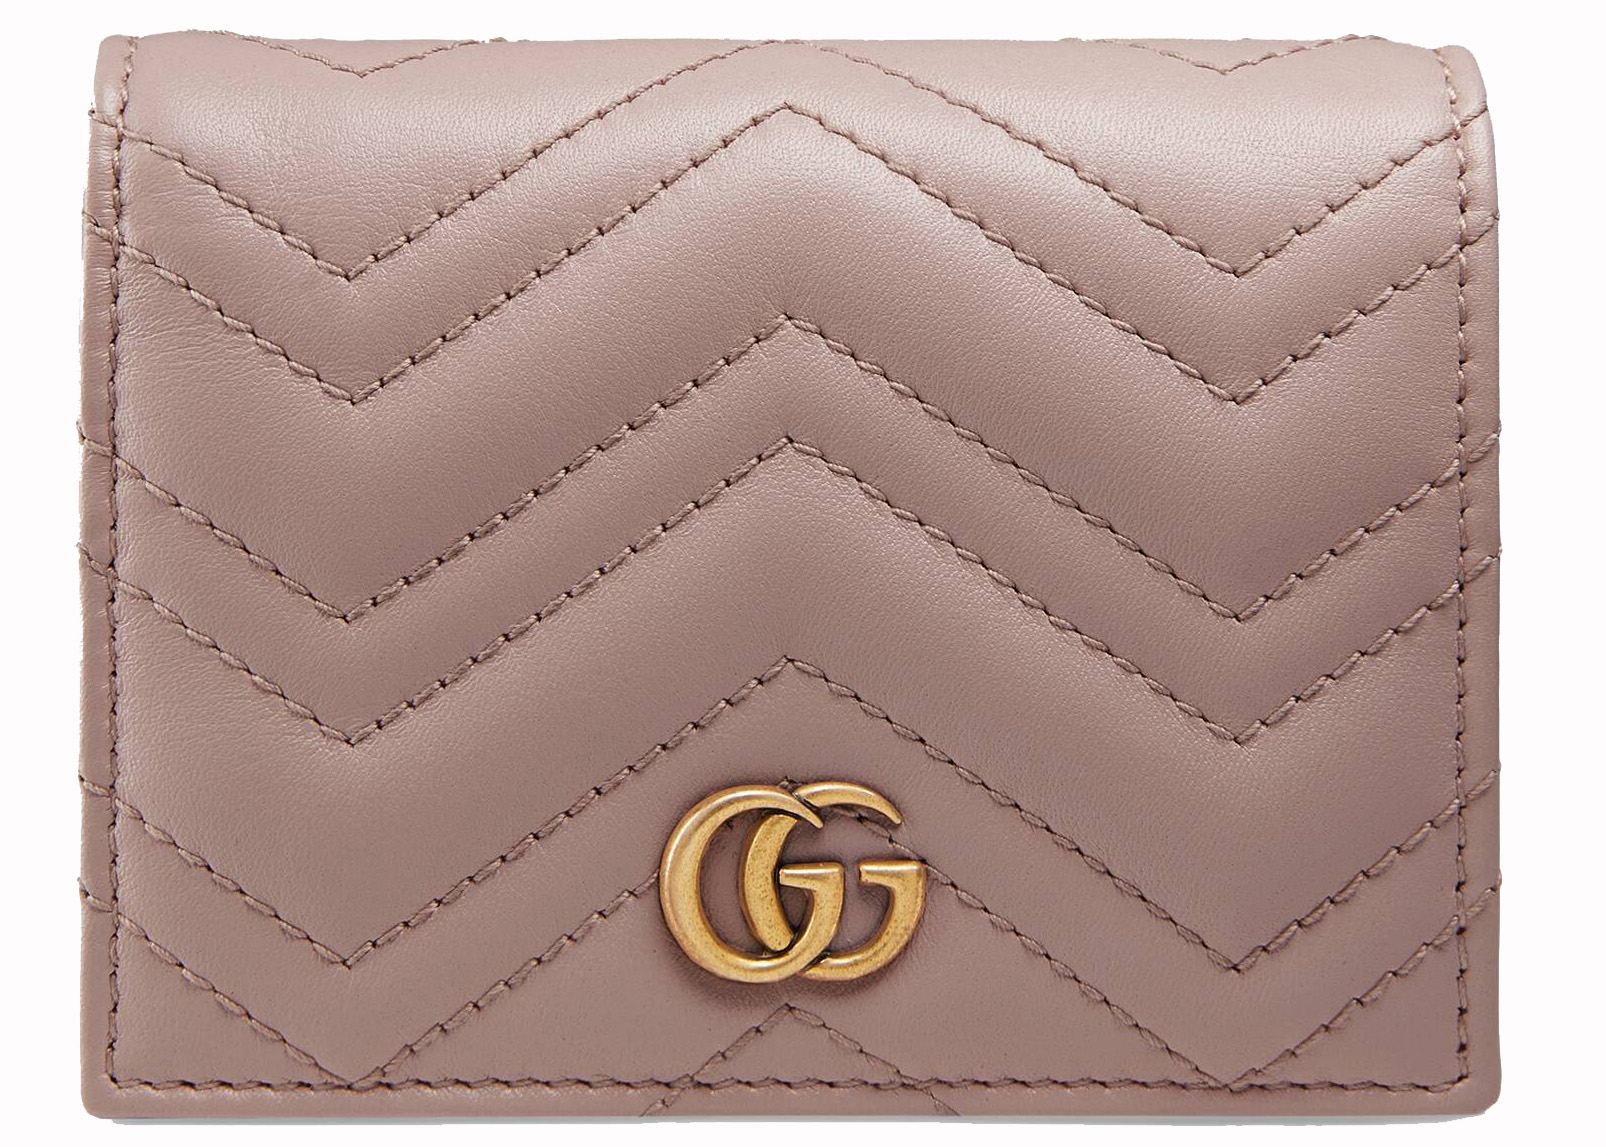 gg marmont wallet